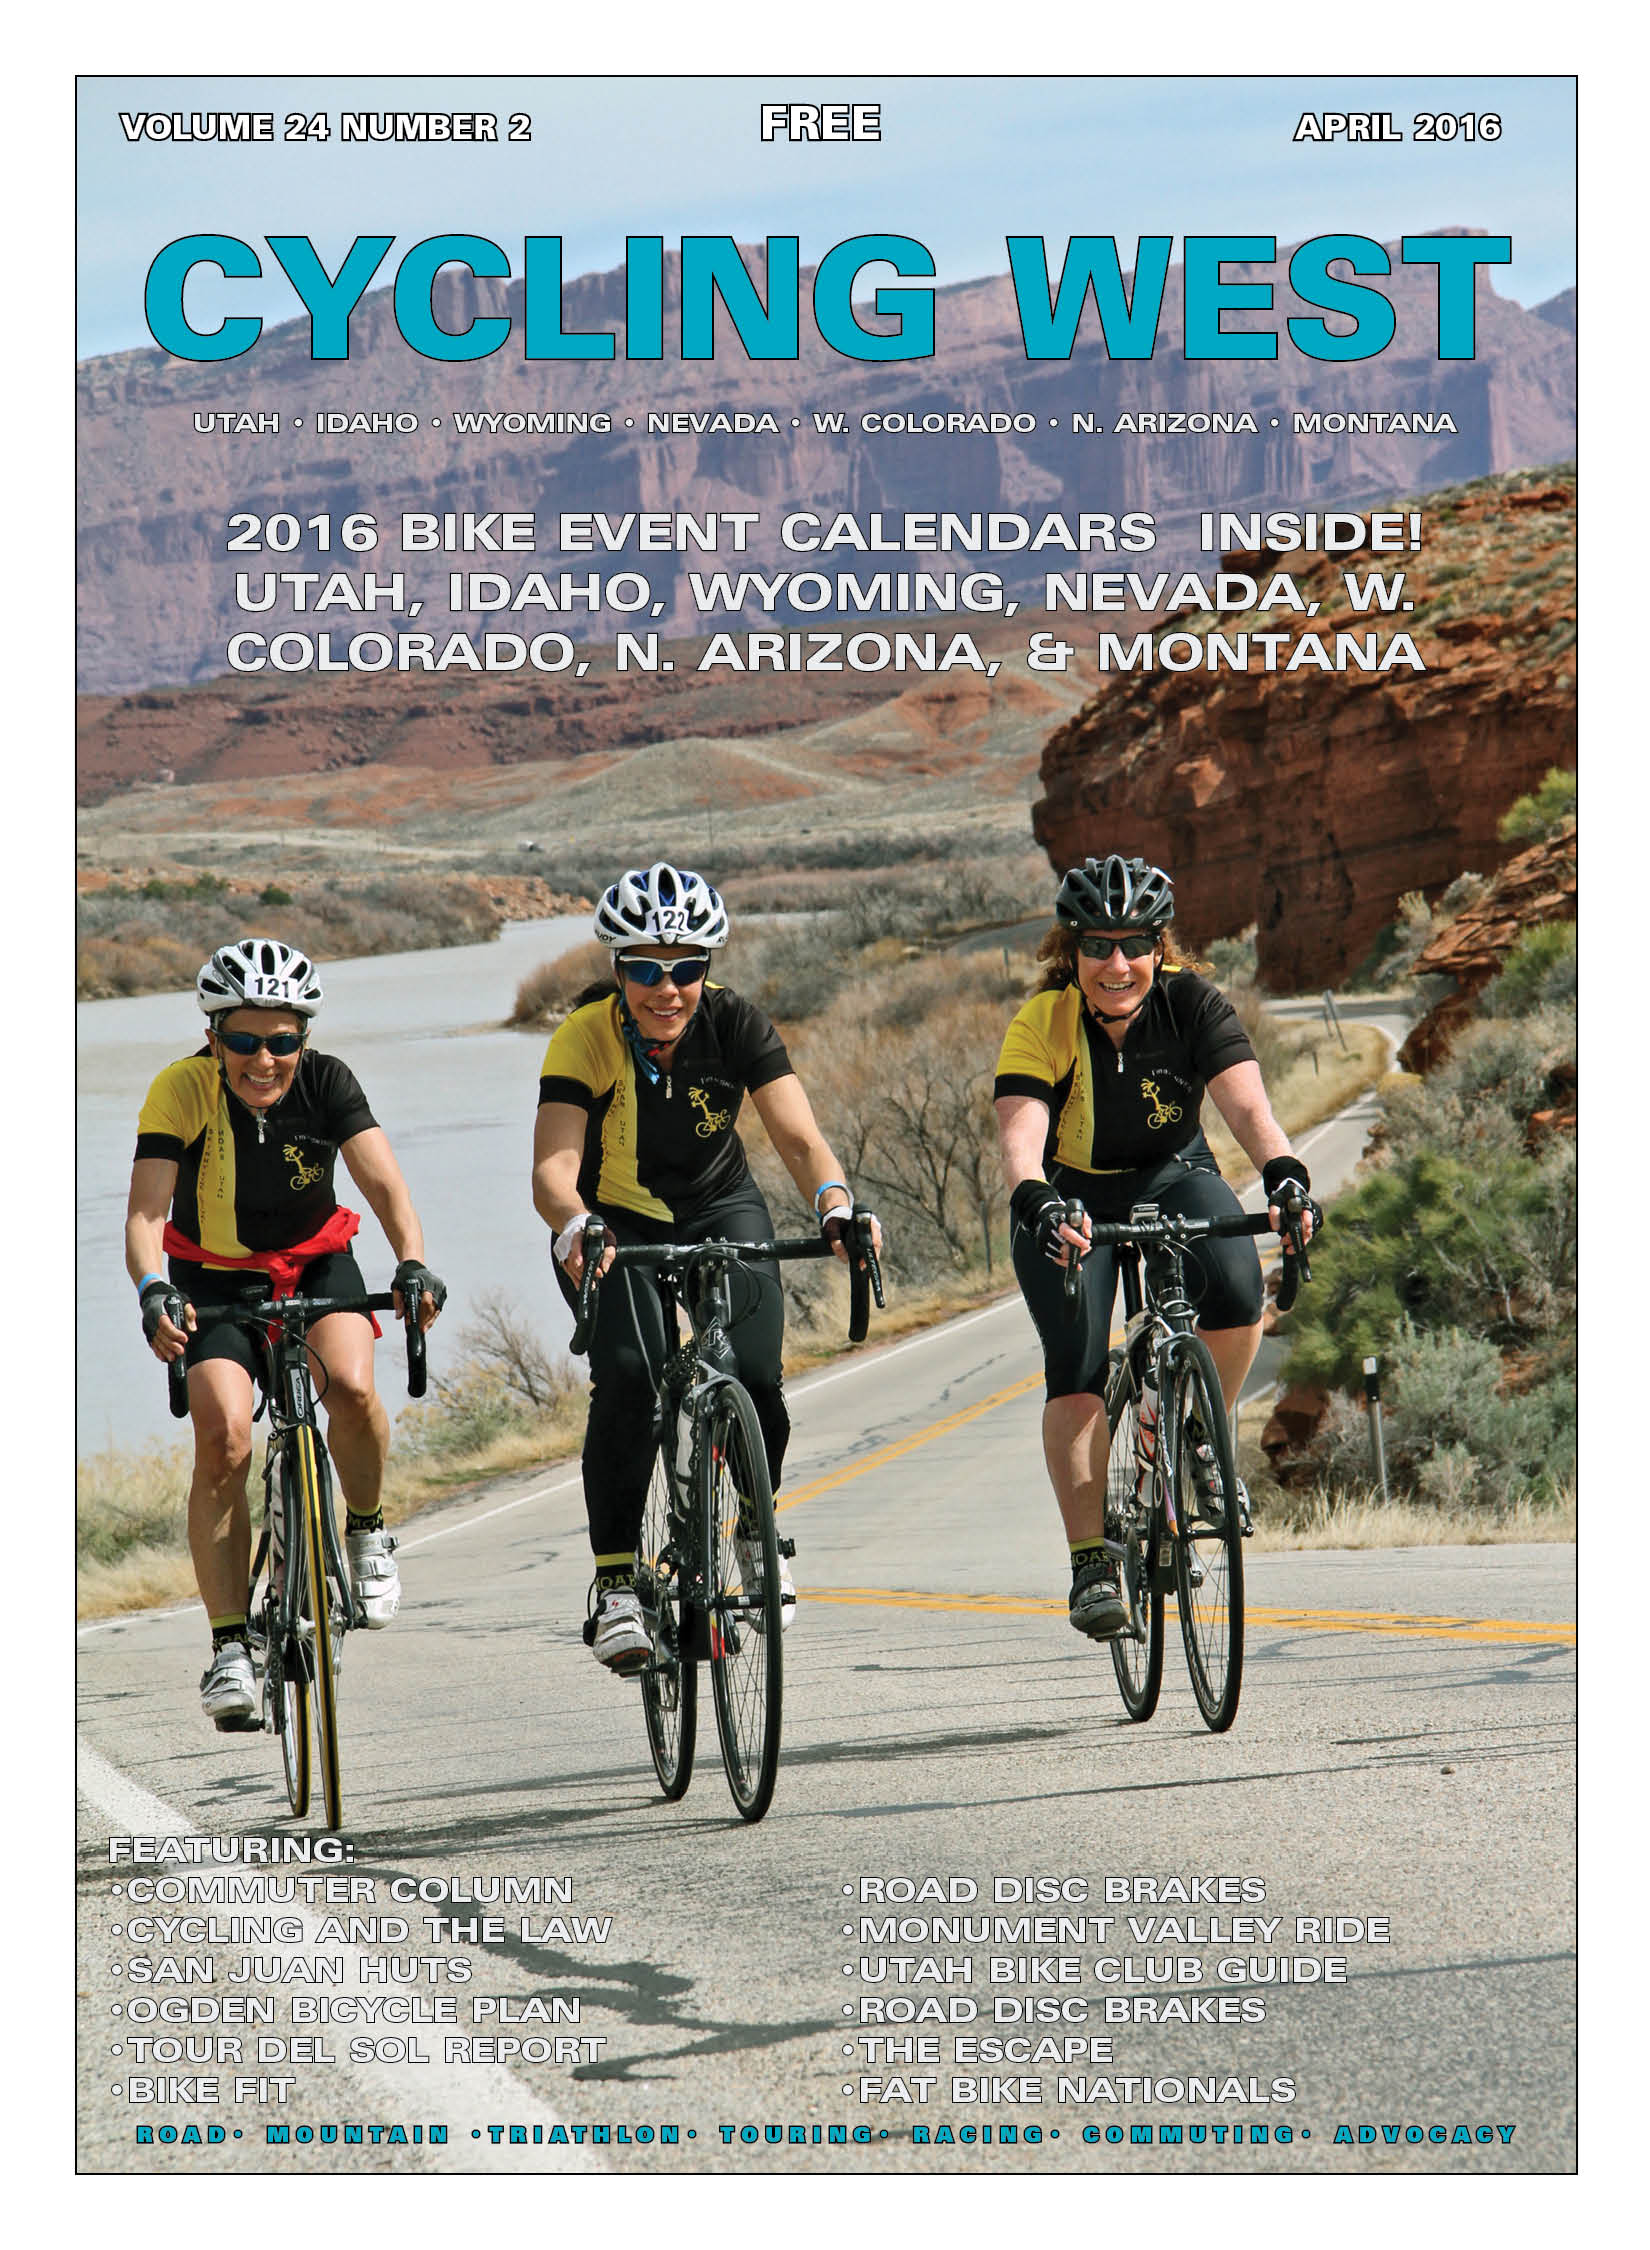 Cycling Utah and Cycling West’s April 2016 Issue is Now Available!